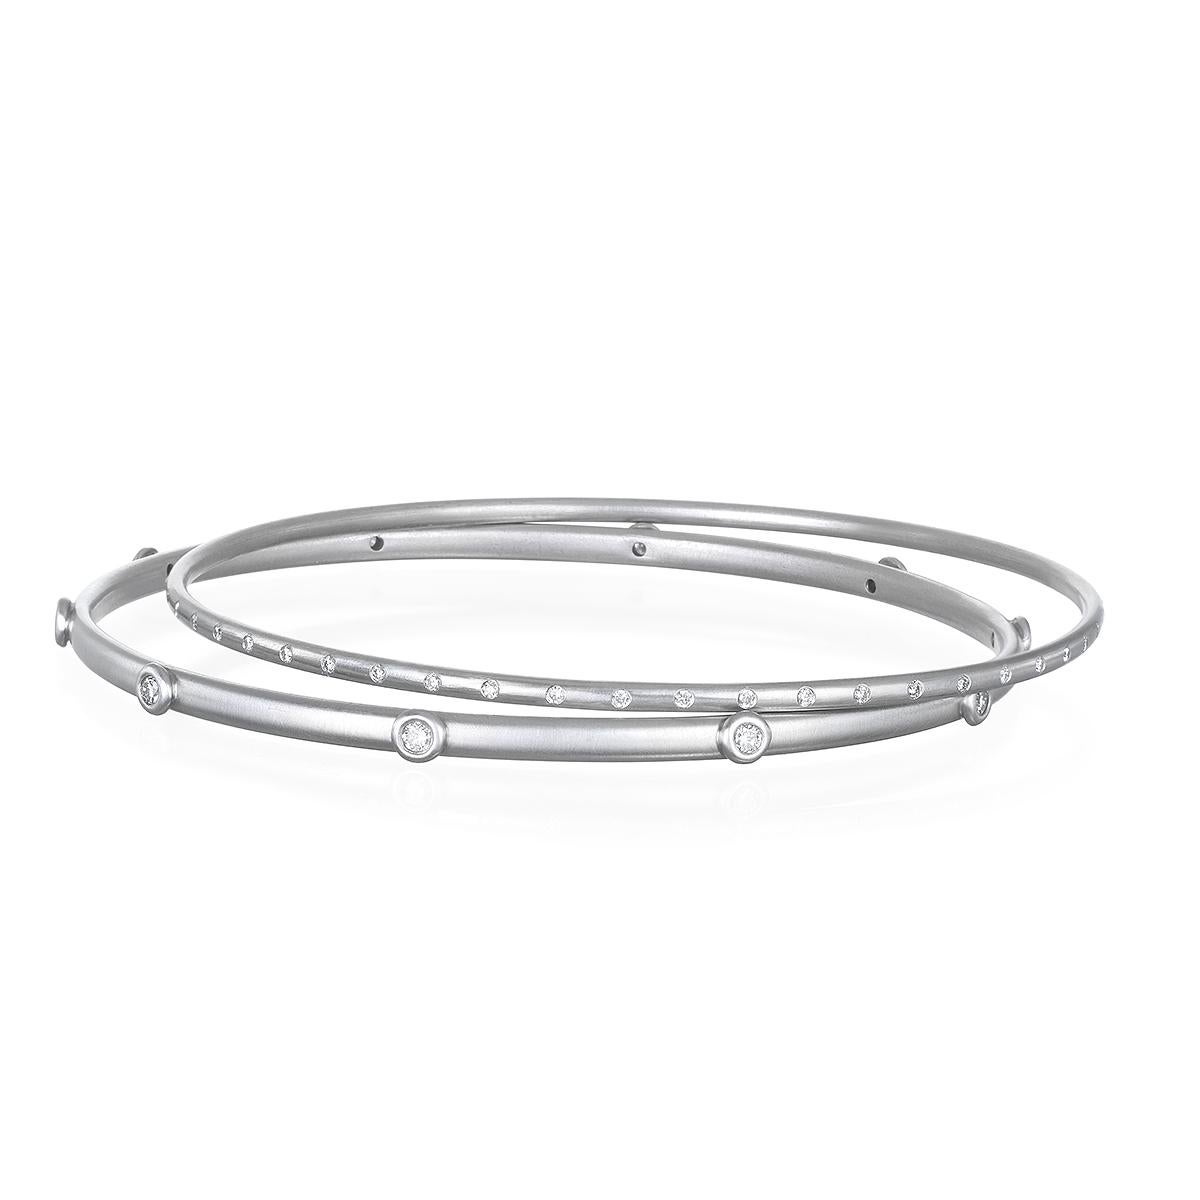 Handcrafted in platinum with diamond granulation bead detail, this diamond bangle is beautifully crafted with a sleek design. Wear alone or complete the look with a stack of bangles. Each sold individually.

Diamonds = .30 cts twt F/G Color, VS